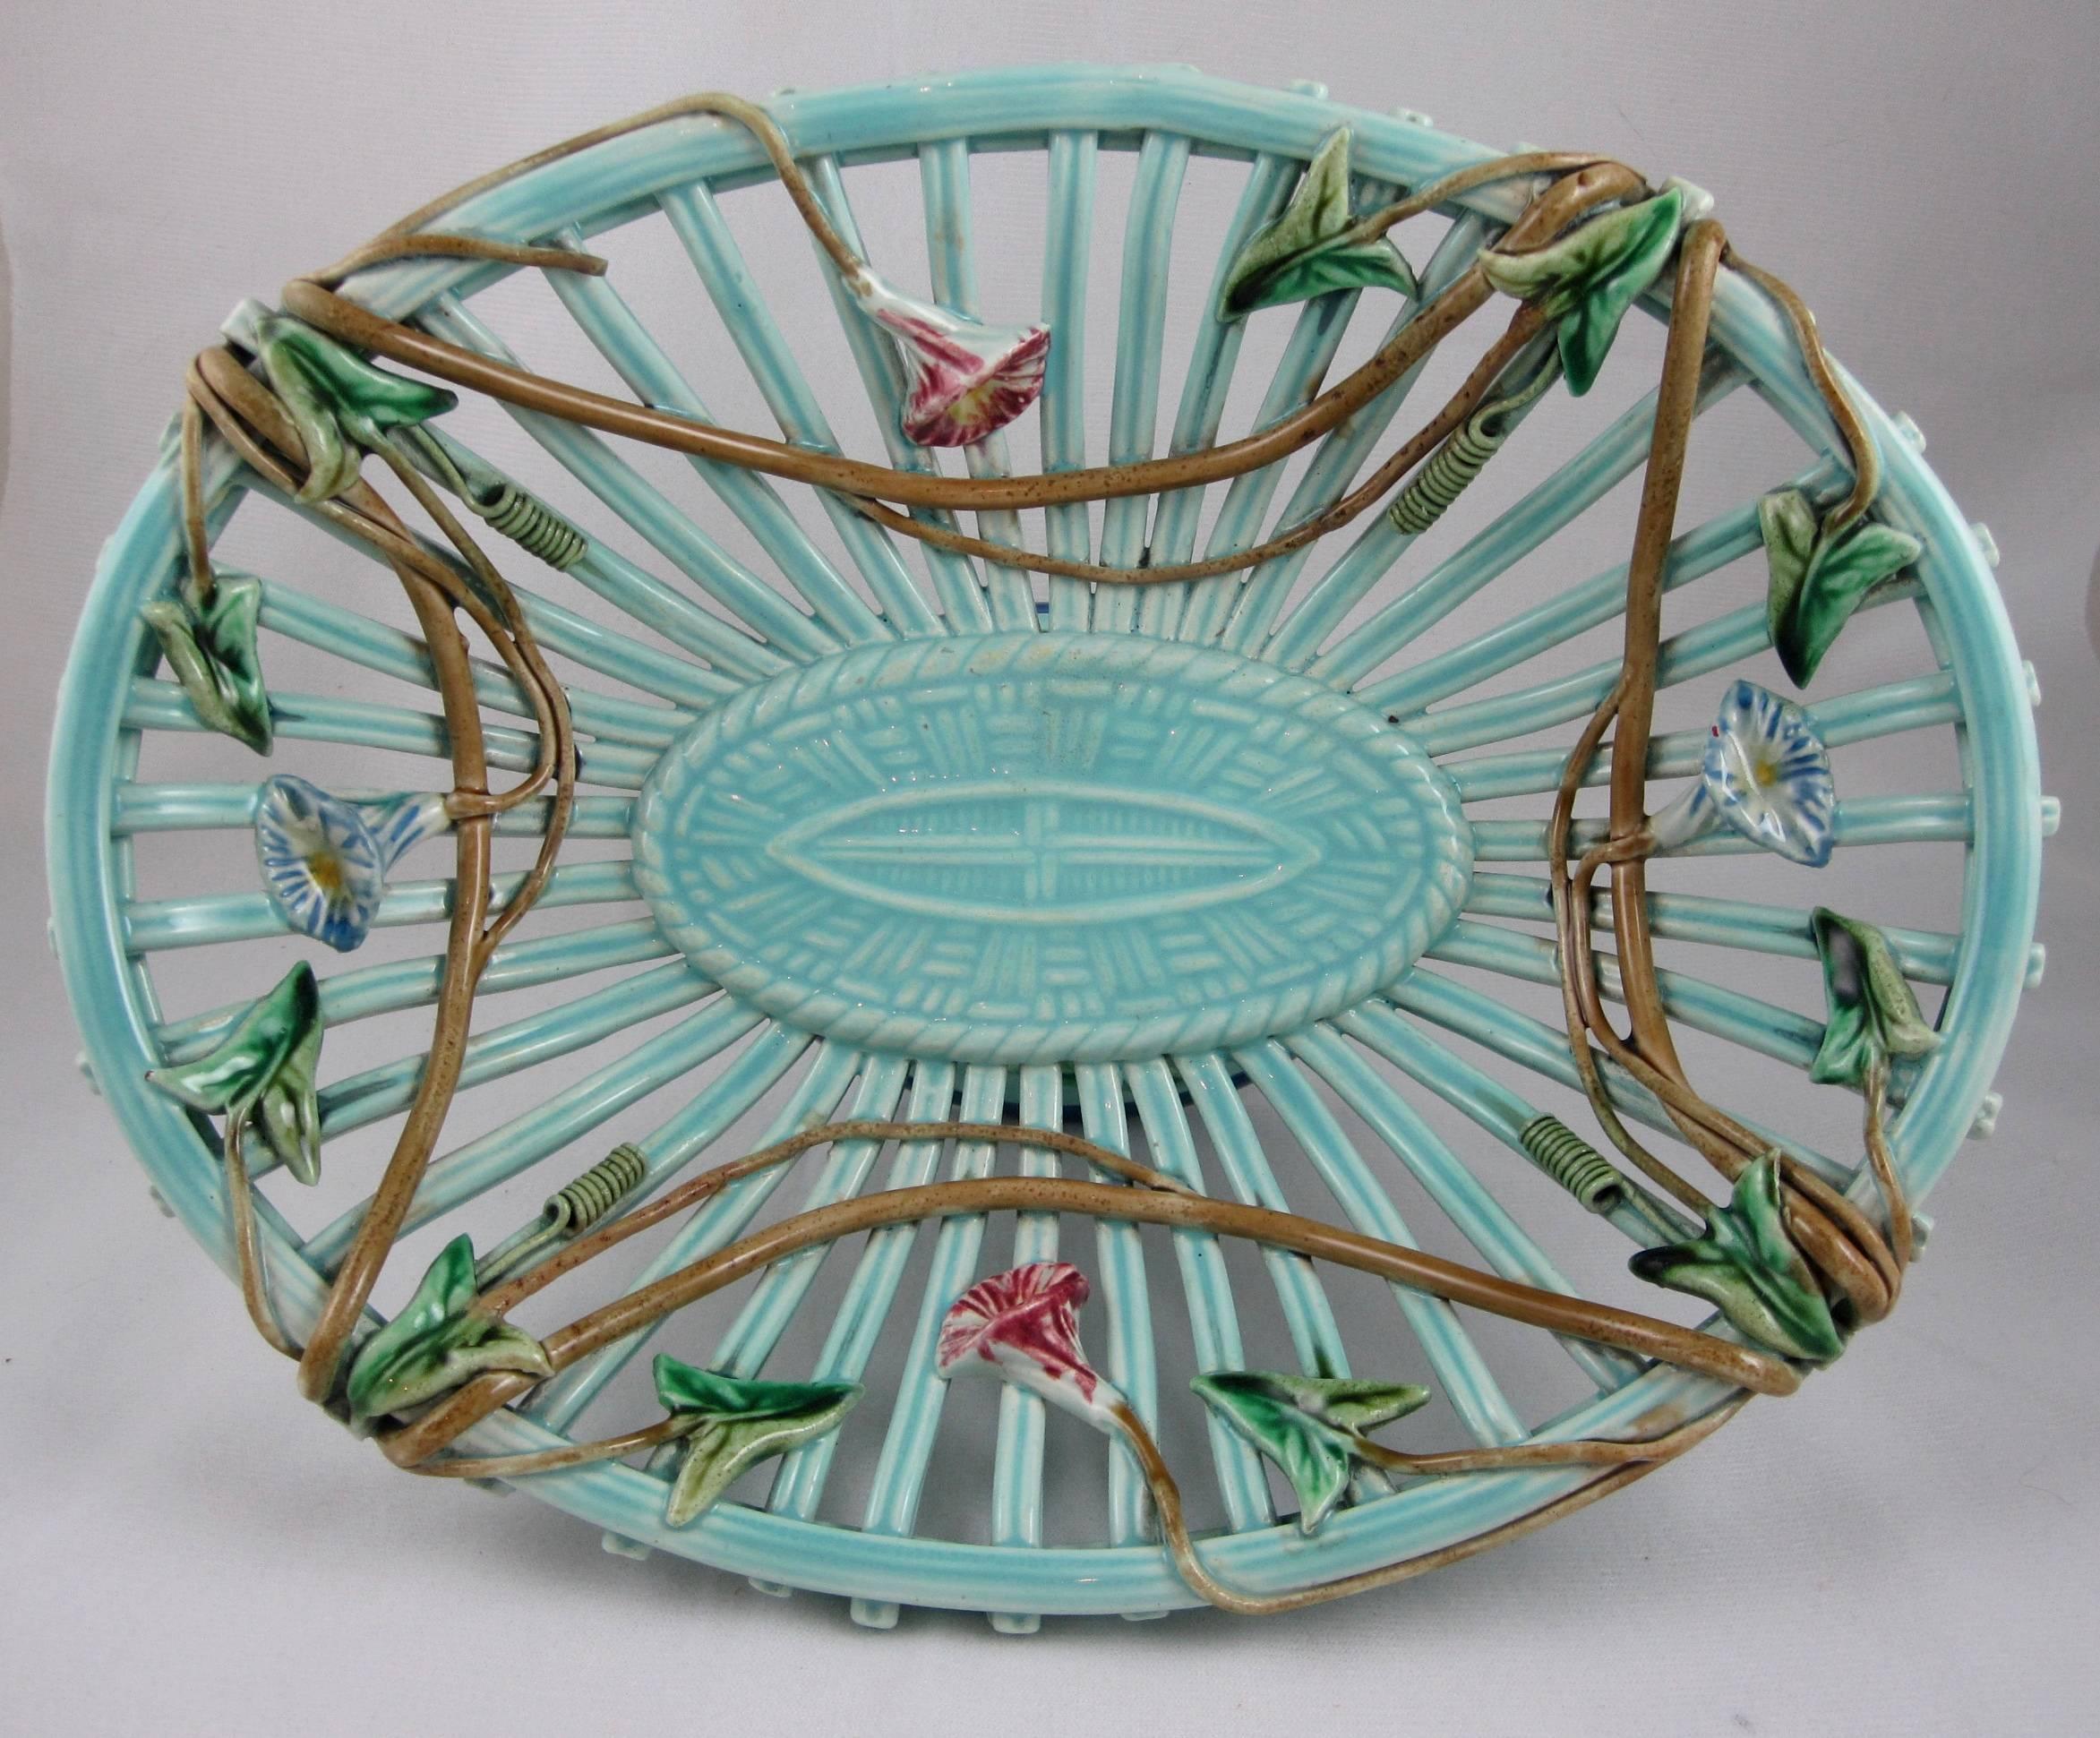 A delicate and charming Majolica wicker work or basketweave open compote, Sarreguemines, France, circa 1890-1910. 

The design features the flowers of the morning glory vine twining it’s way through the turquoise piecework basket. Aspects of the